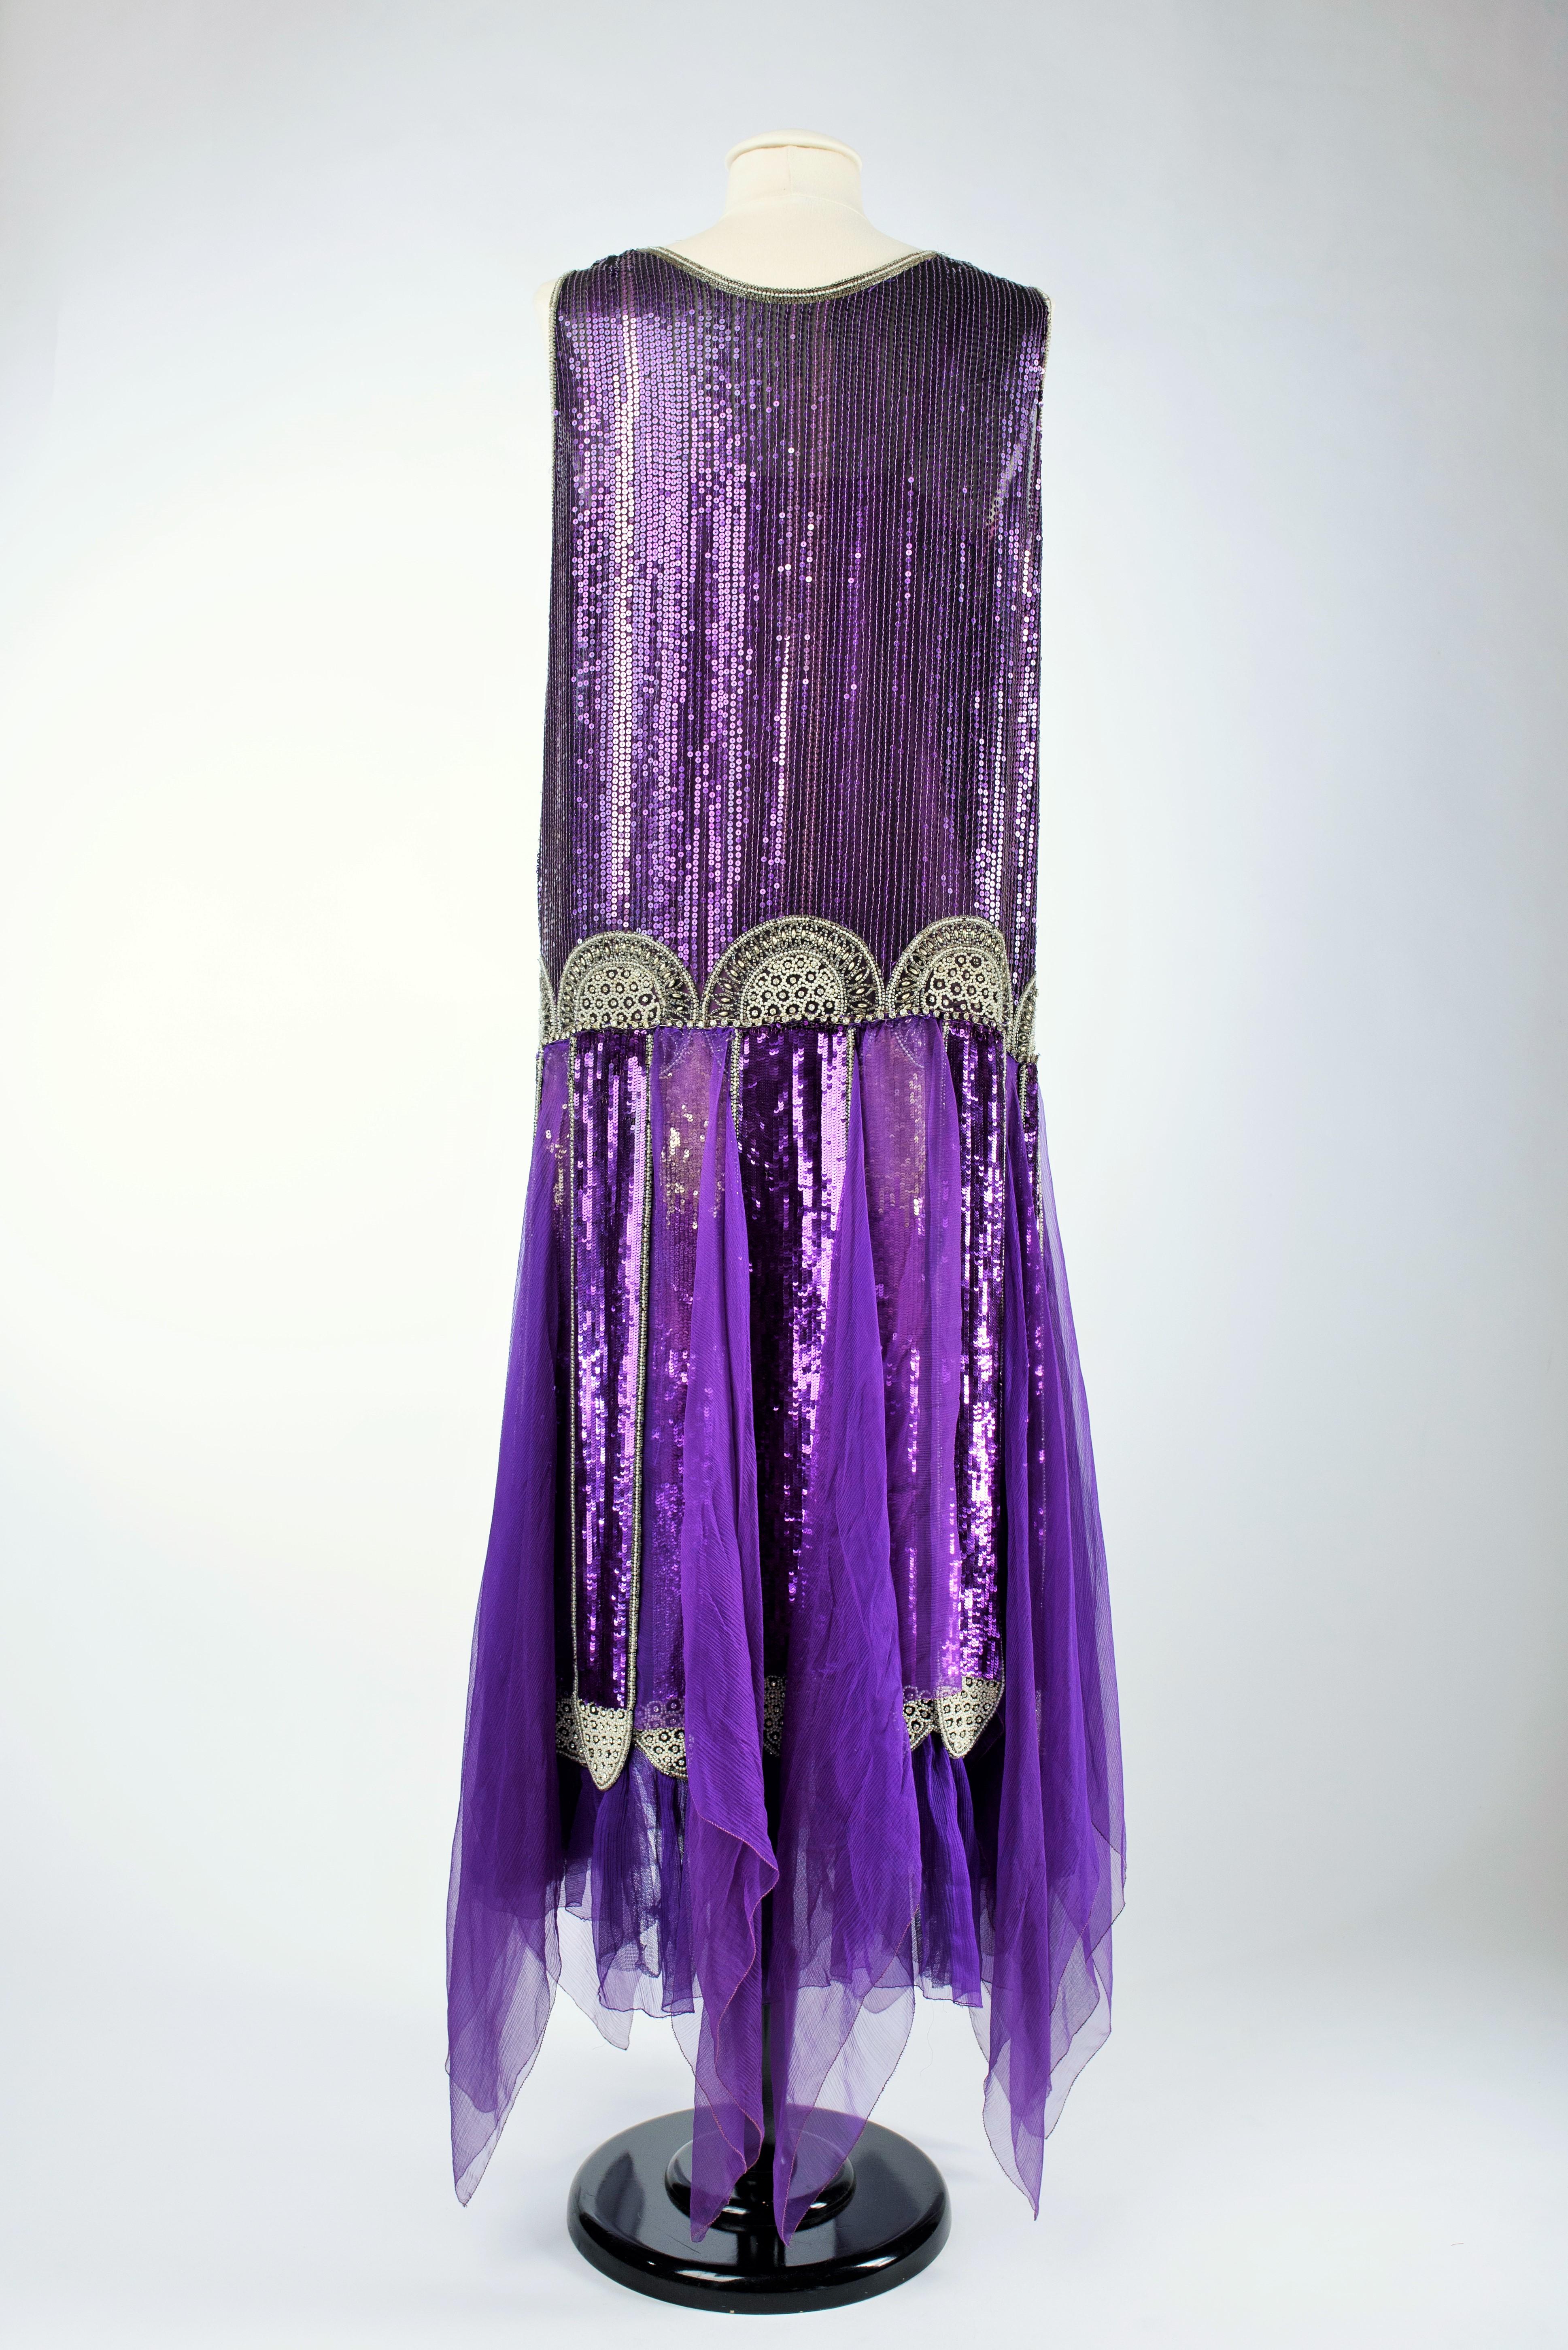 A Paul Poiret Ball Gown in Sequined Silk Crepe and Satin - France Circa 1925 For Sale 7